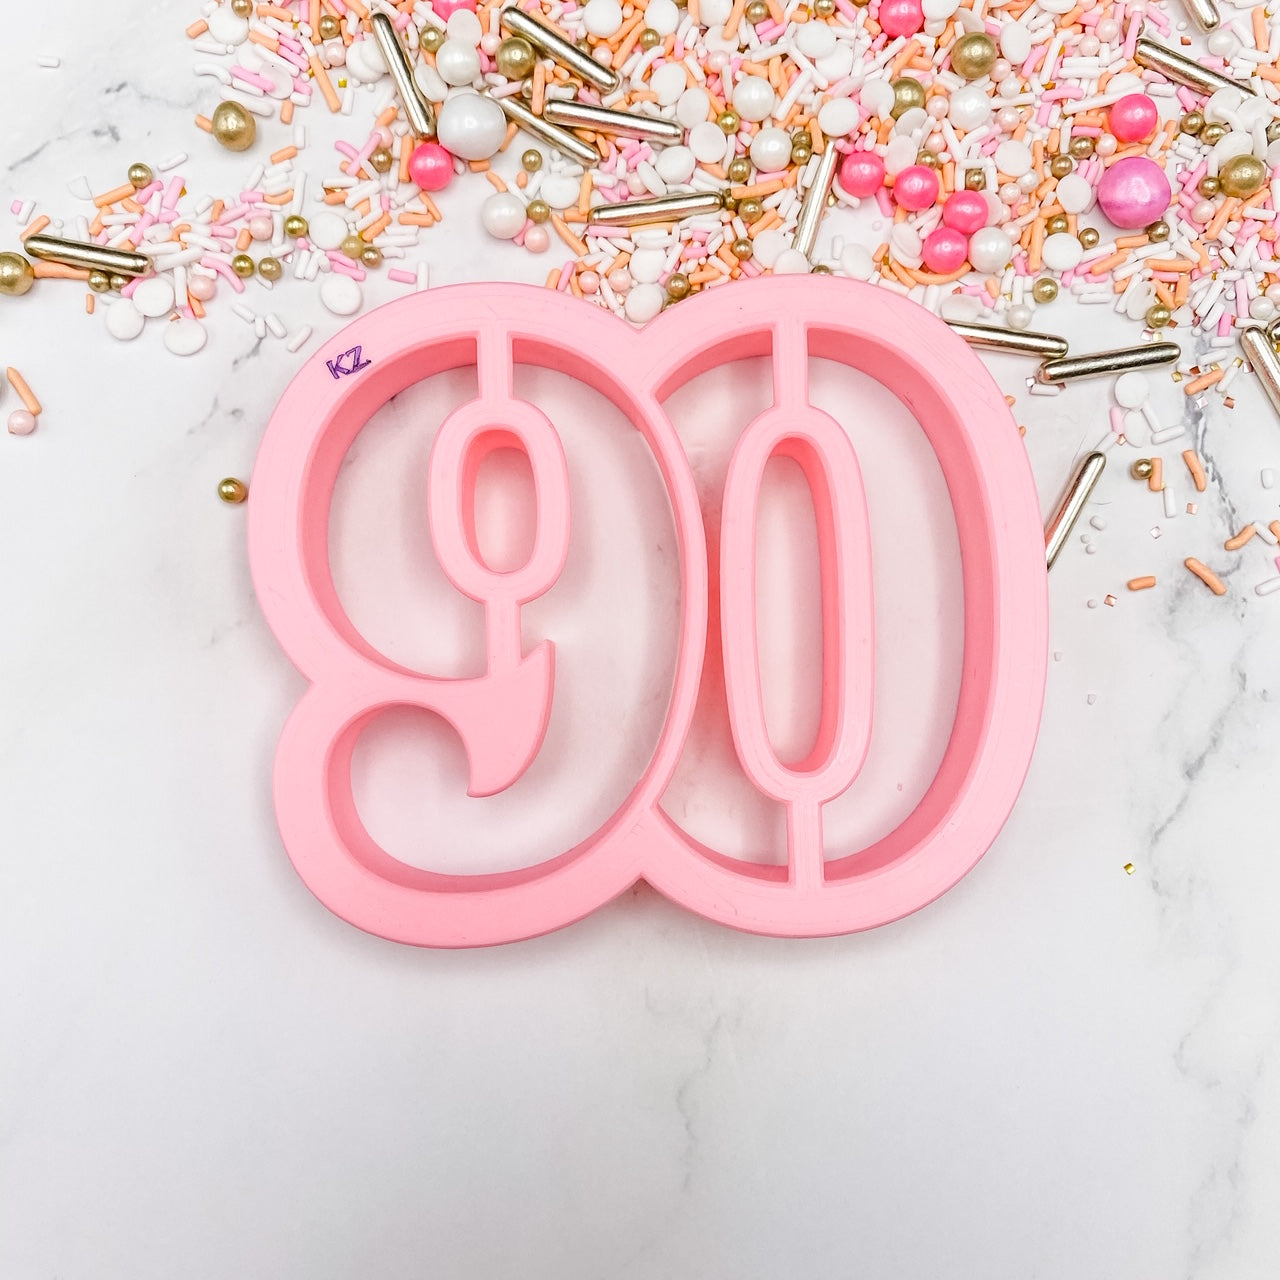 cookie cutter in the shape of the number 90